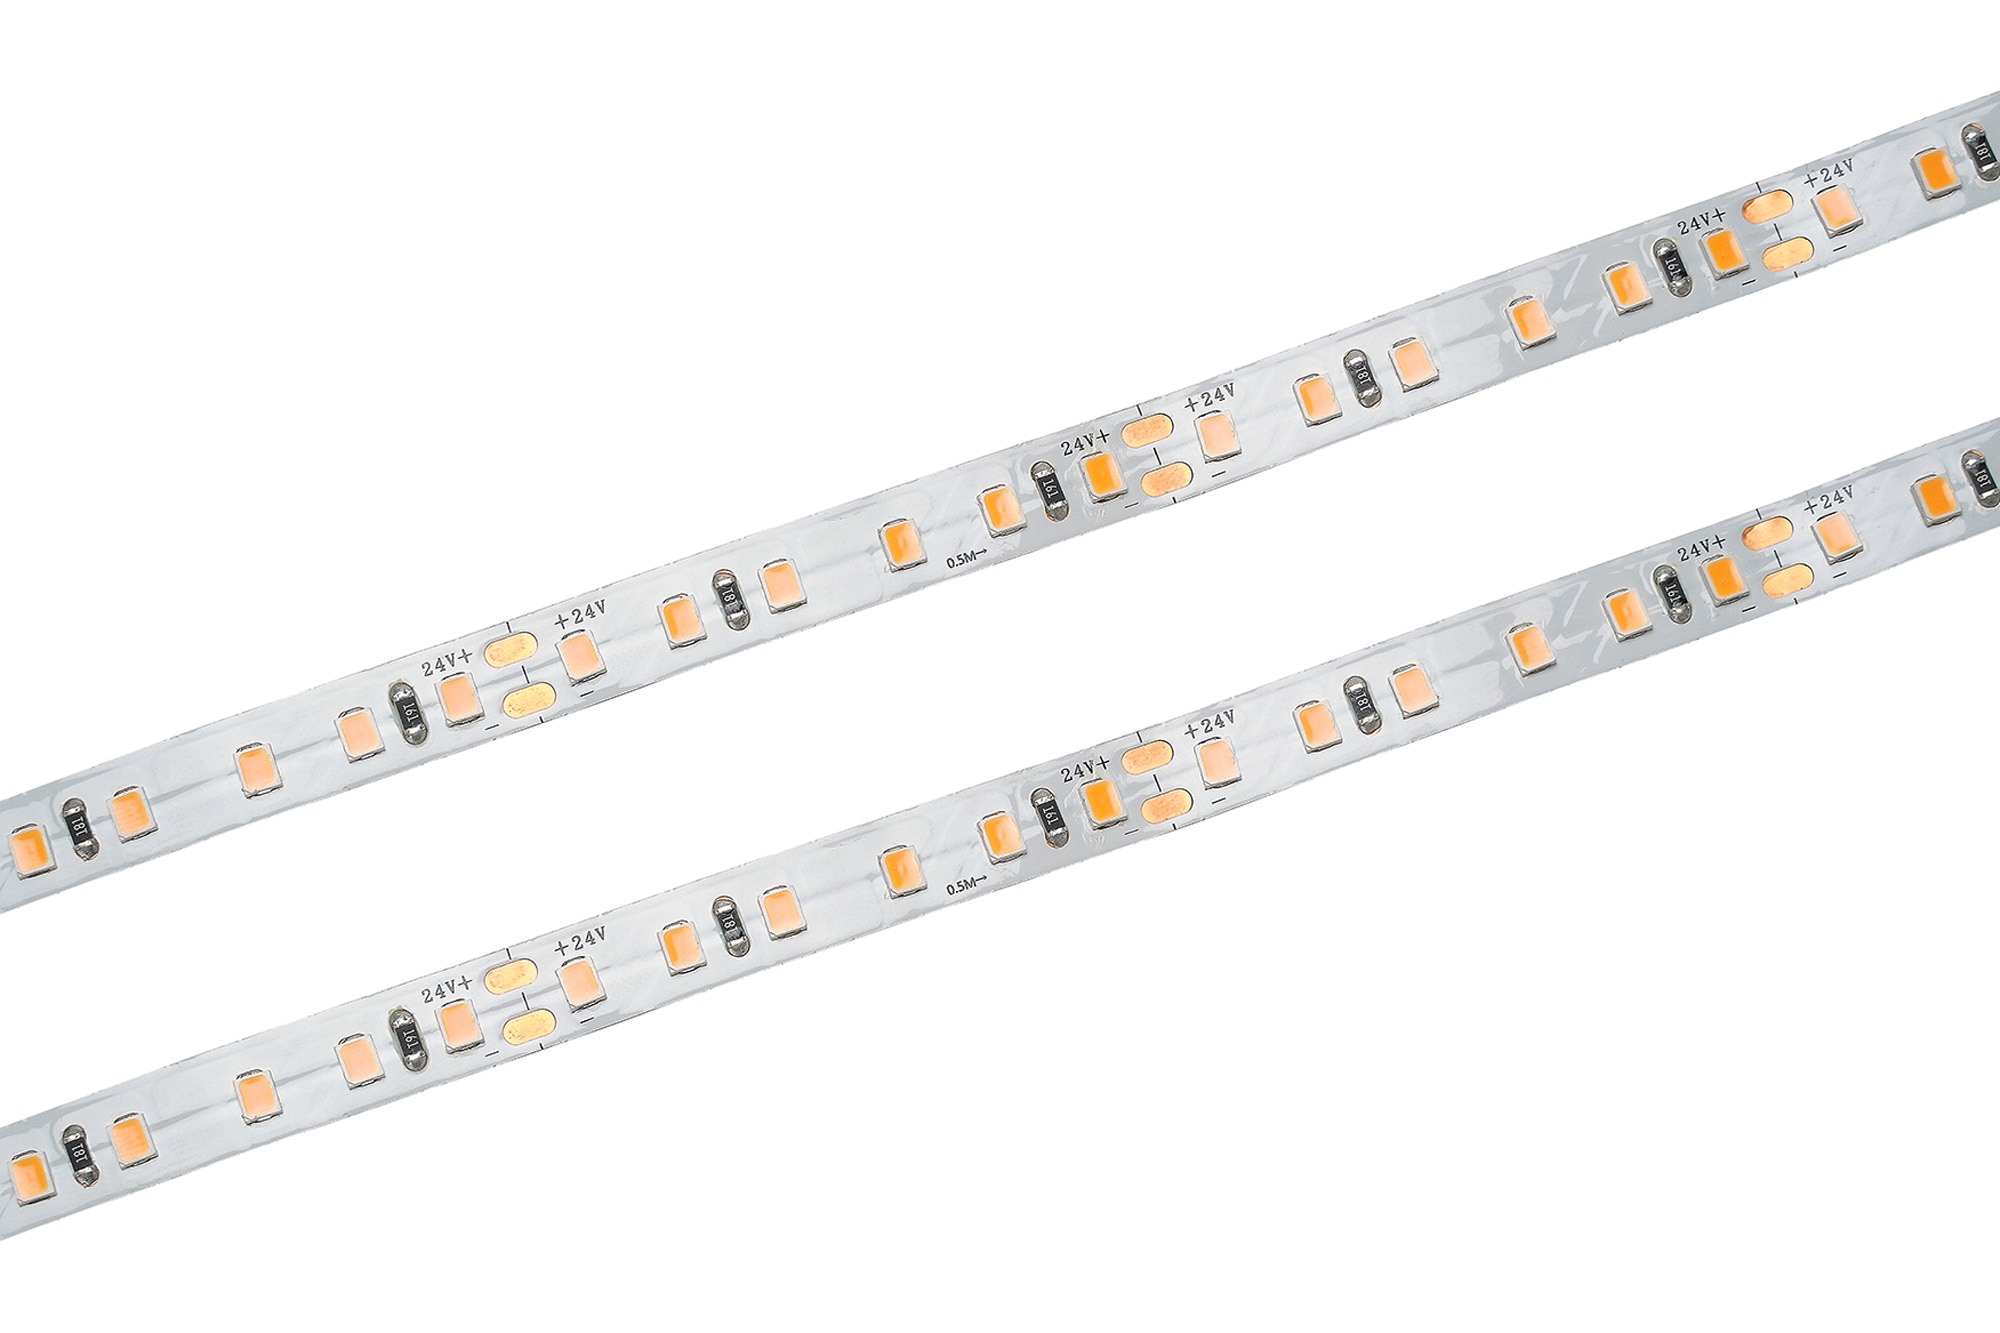 DX700113  Axios Select; 5mx10mm; 24V; 48W ; LED Strip 700lm/m 1800K  IP20;